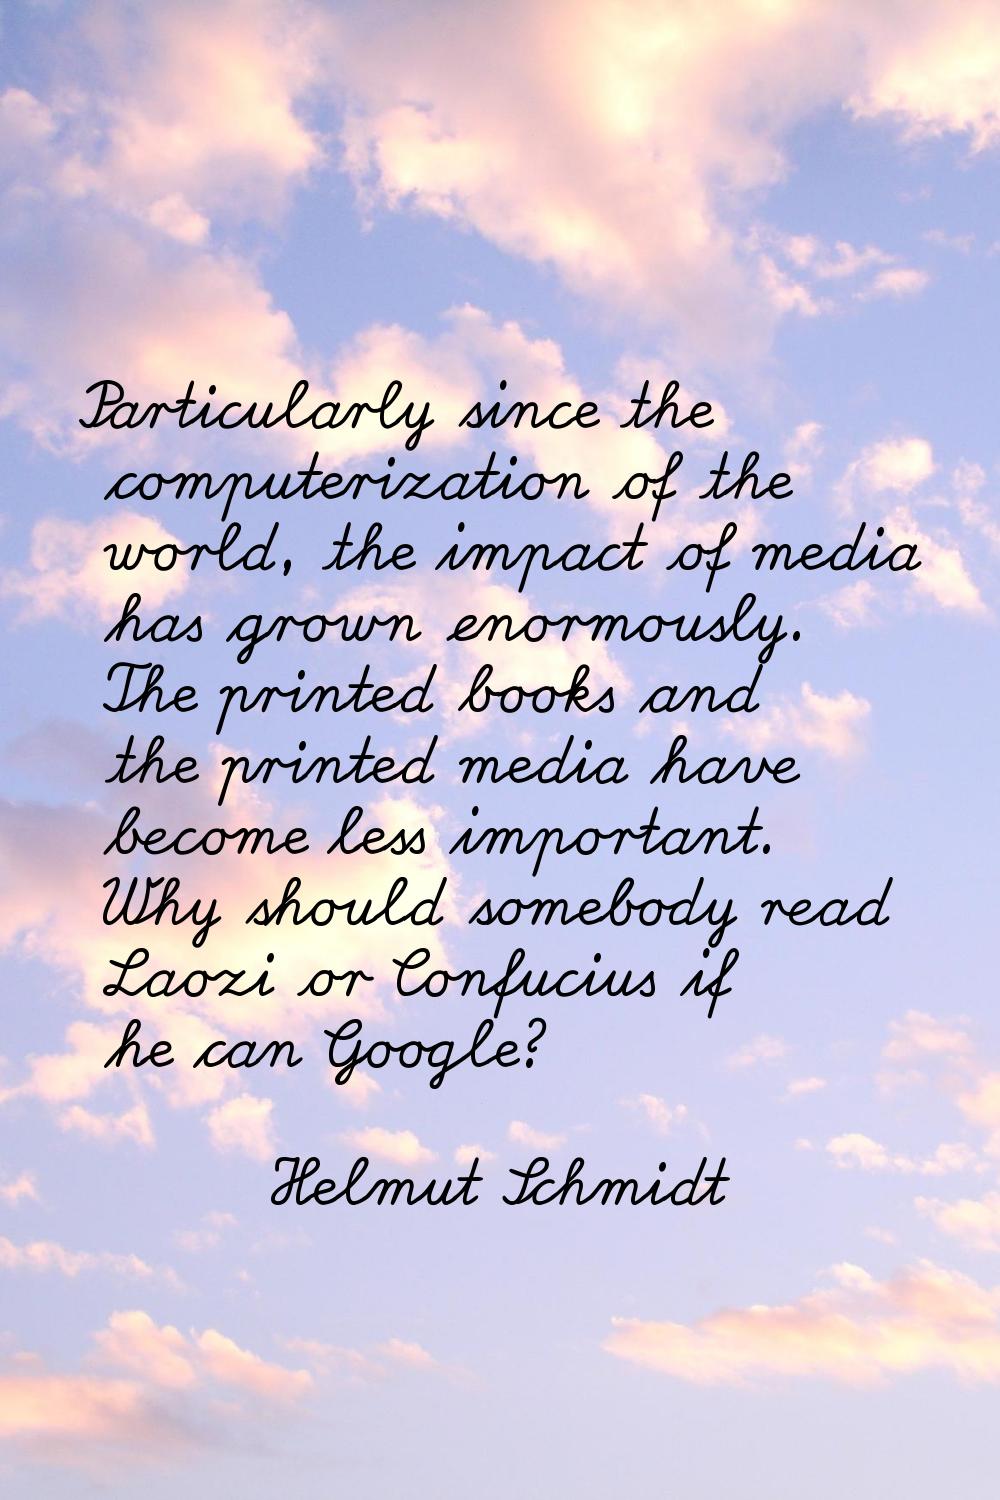 Particularly since the computerization of the world, the impact of media has grown enormously. The 